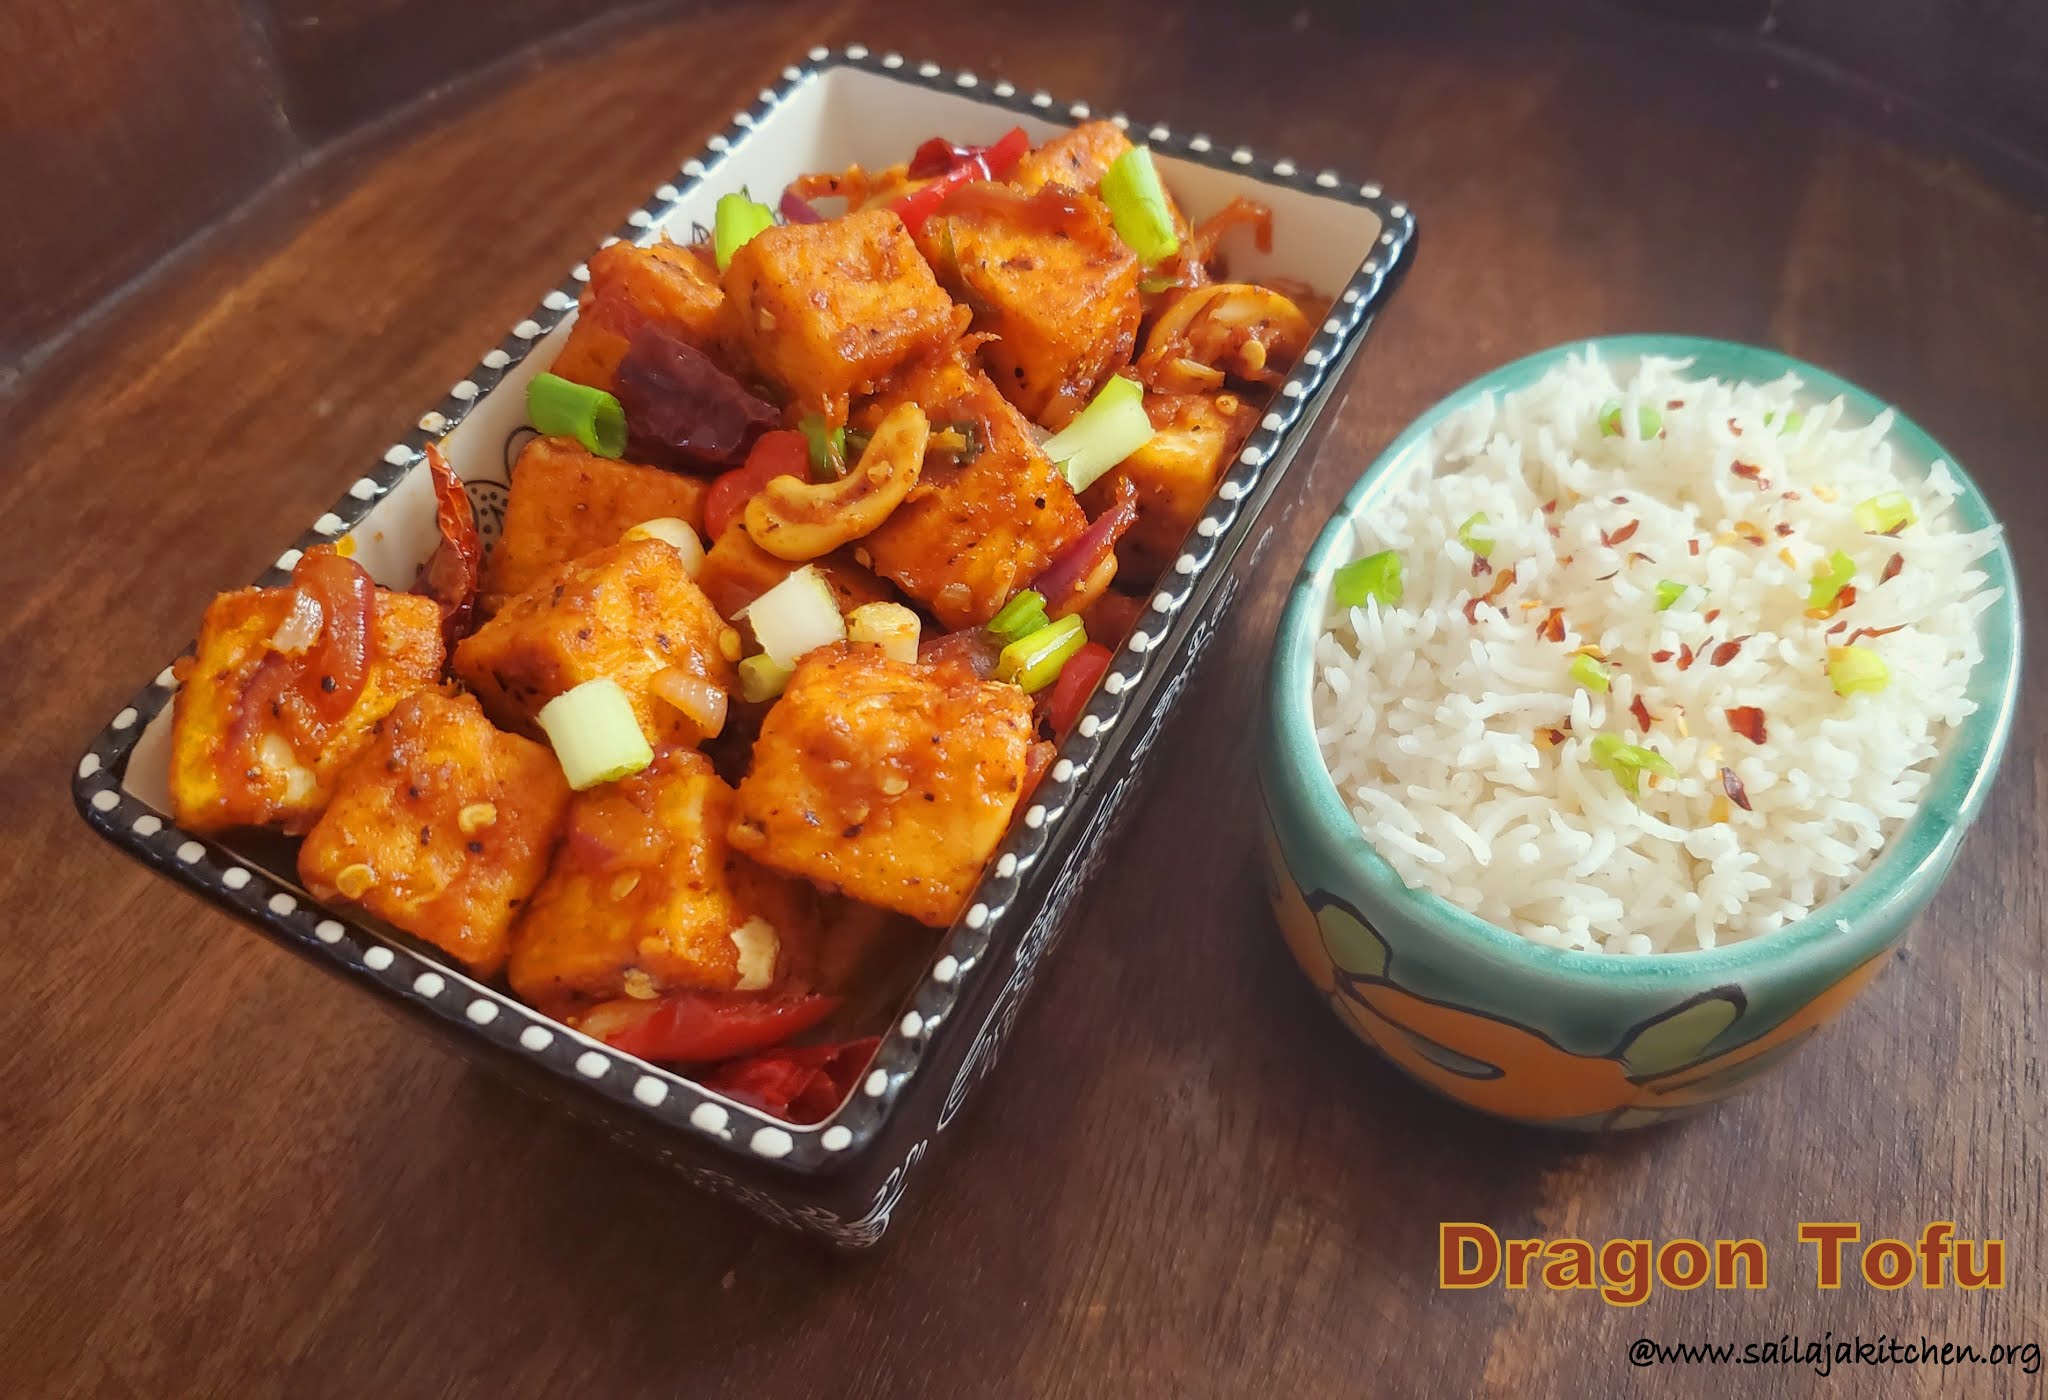 Sailaja Kitchen...A site for all food lovers!: Dragon Tofu / Indo ...